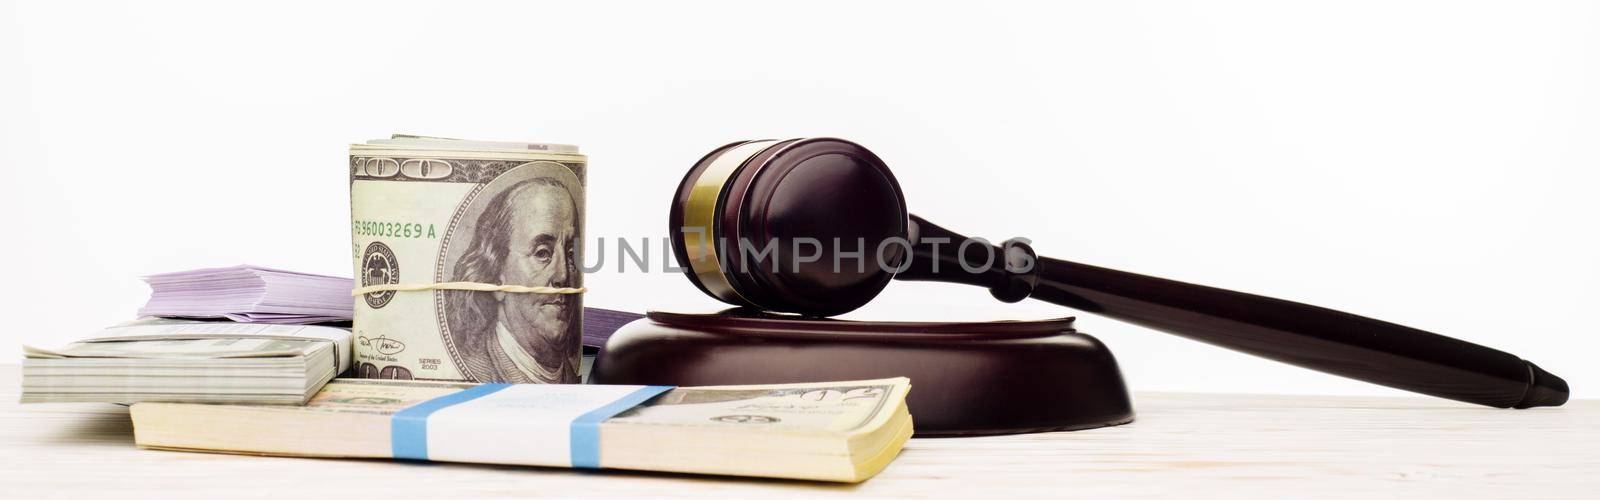 Judge's gavel and packs of dollars and euro banknotes on a white wooden table by zartarn